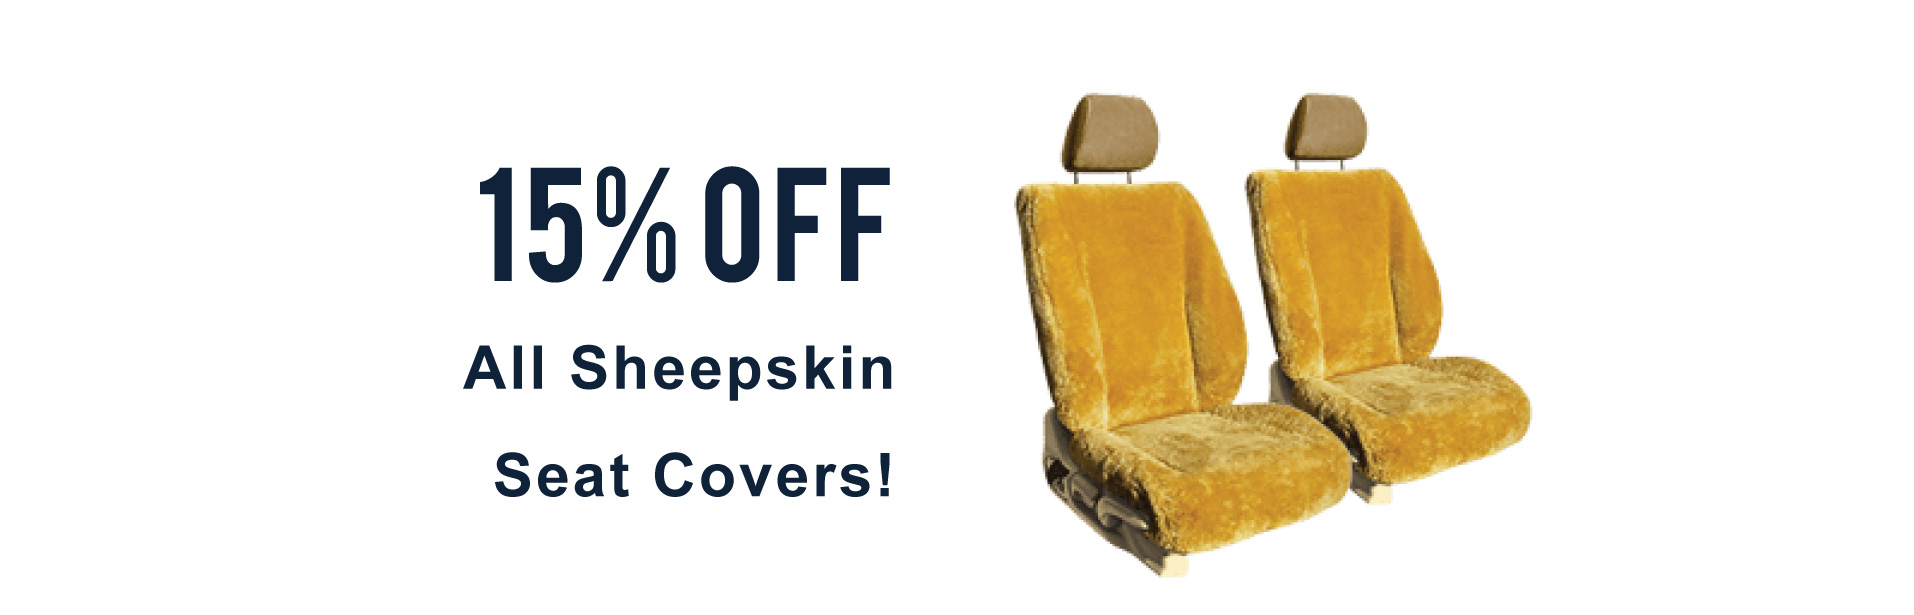 15% Off All Sheepskin Seat Covers!